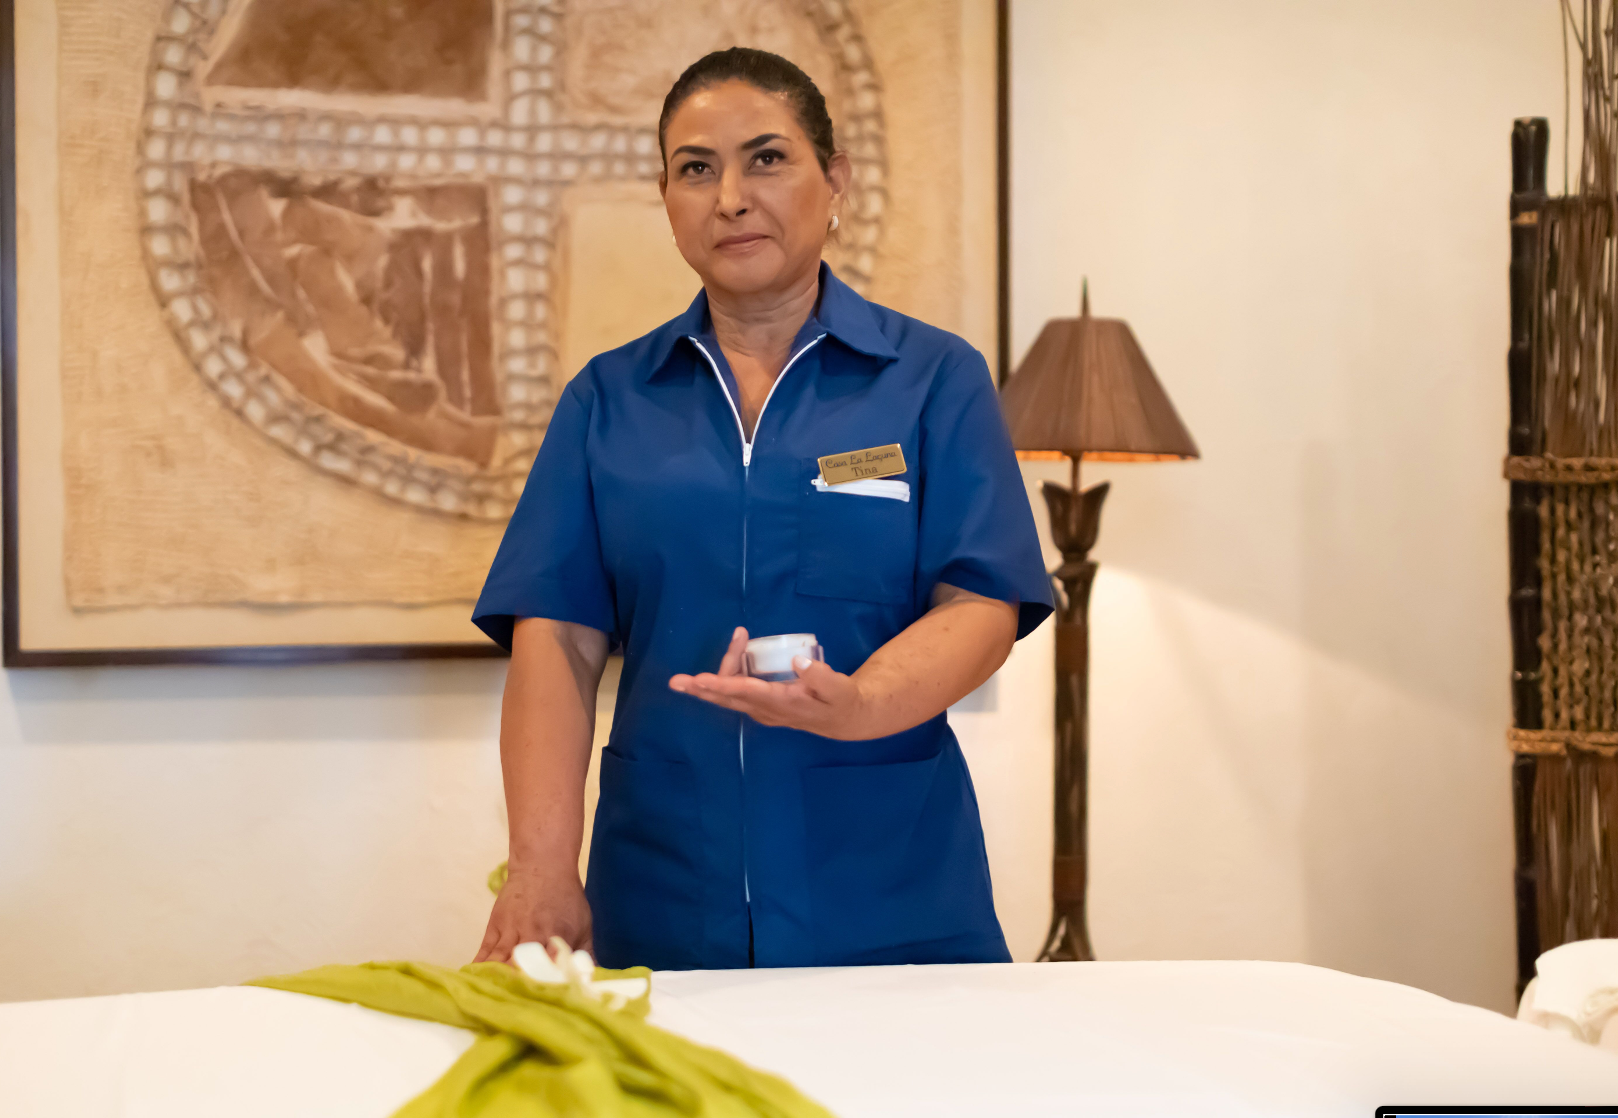 a woman in a blue uniform is standing in front of a massage table holding a container